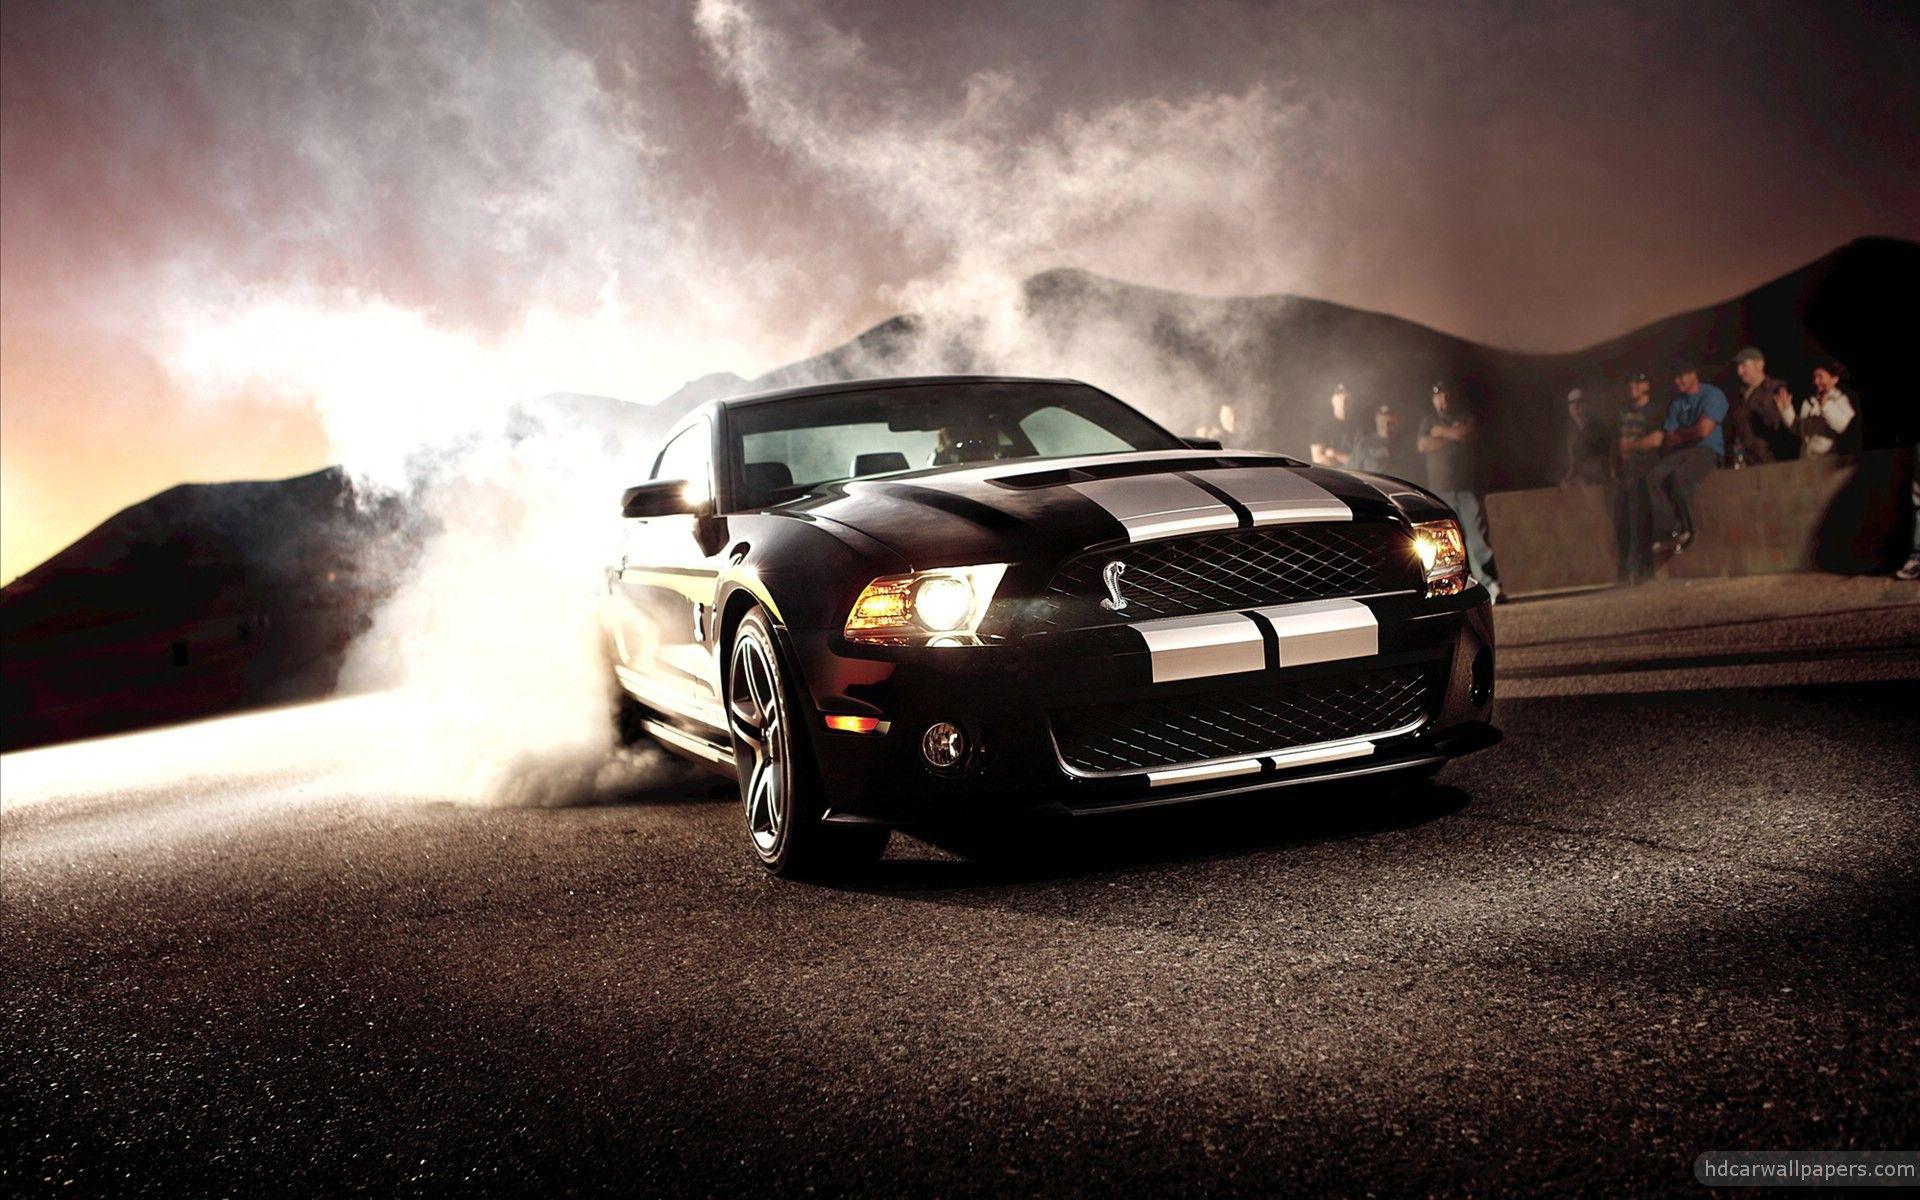 Ford Mustang Shelby Gt500 Wallpaper HD. American Car Show